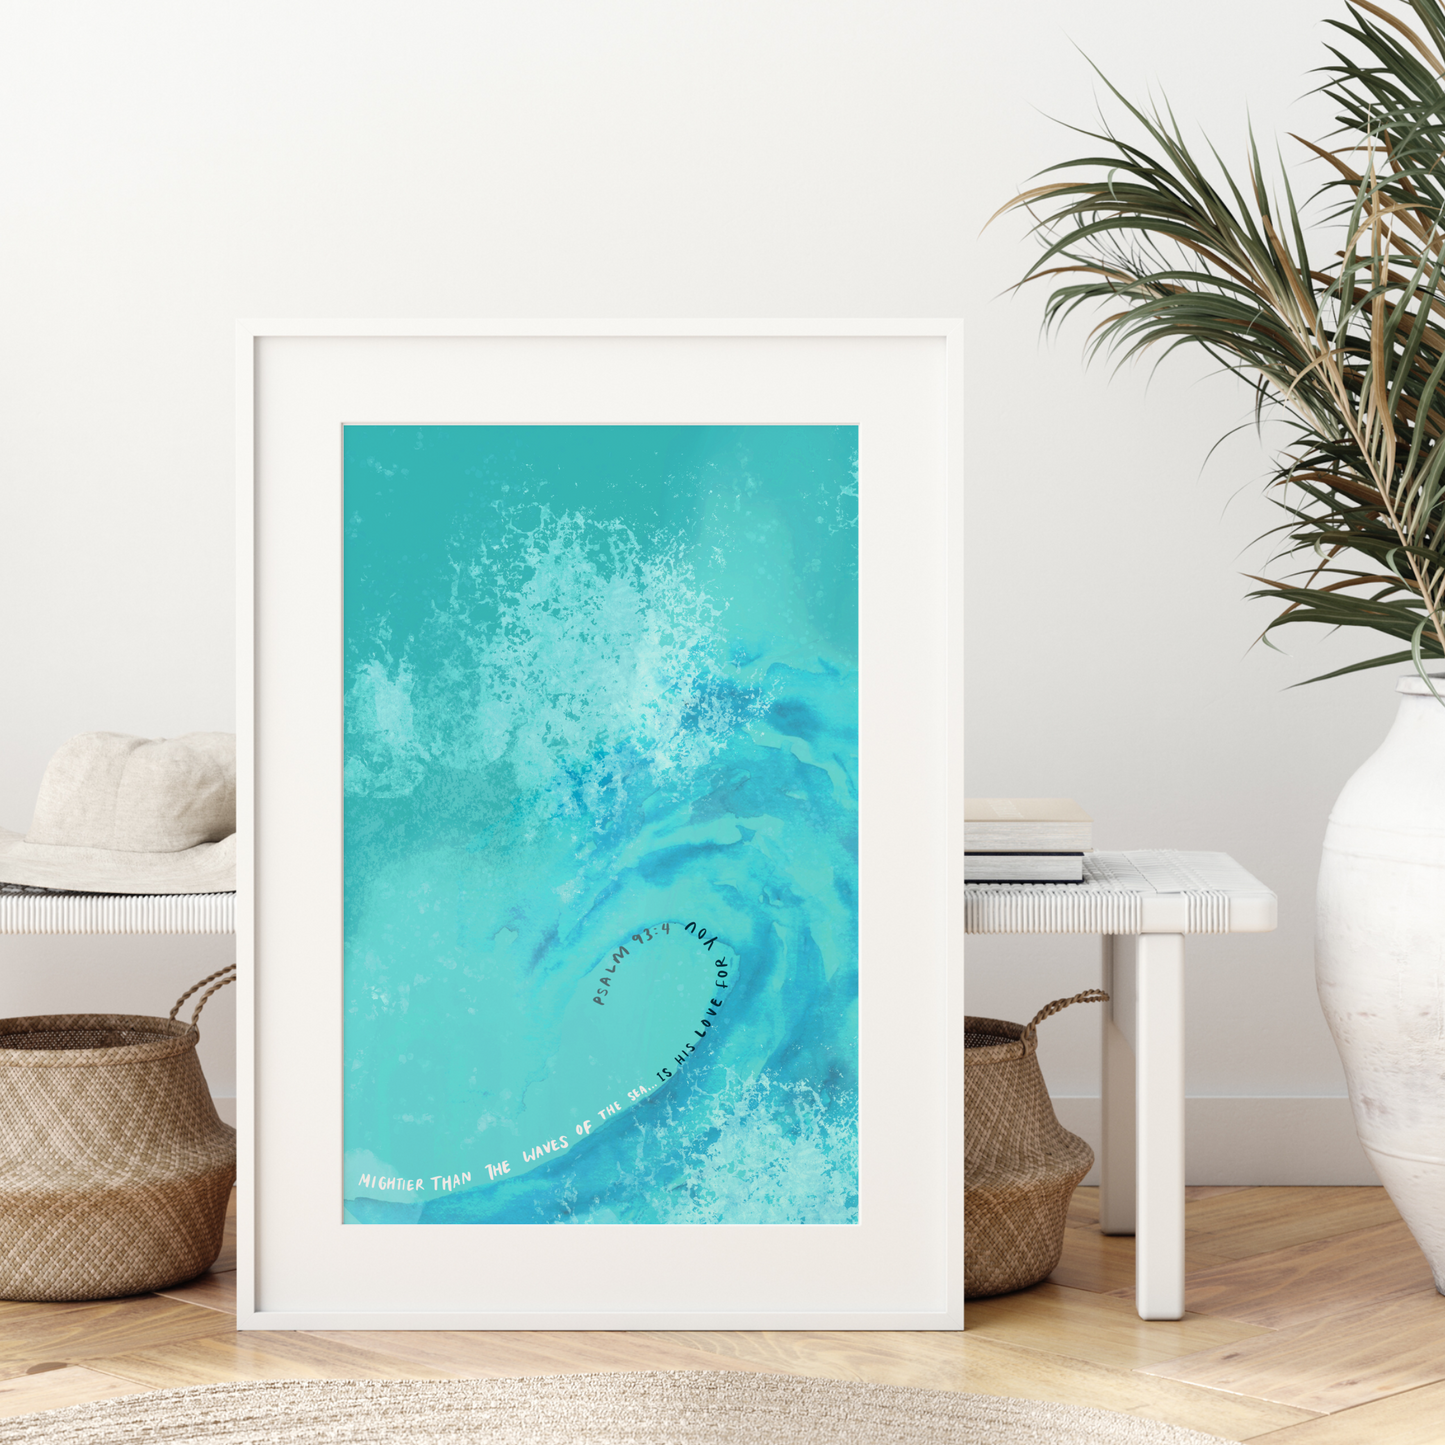 Mightier than the waves of the sea Print